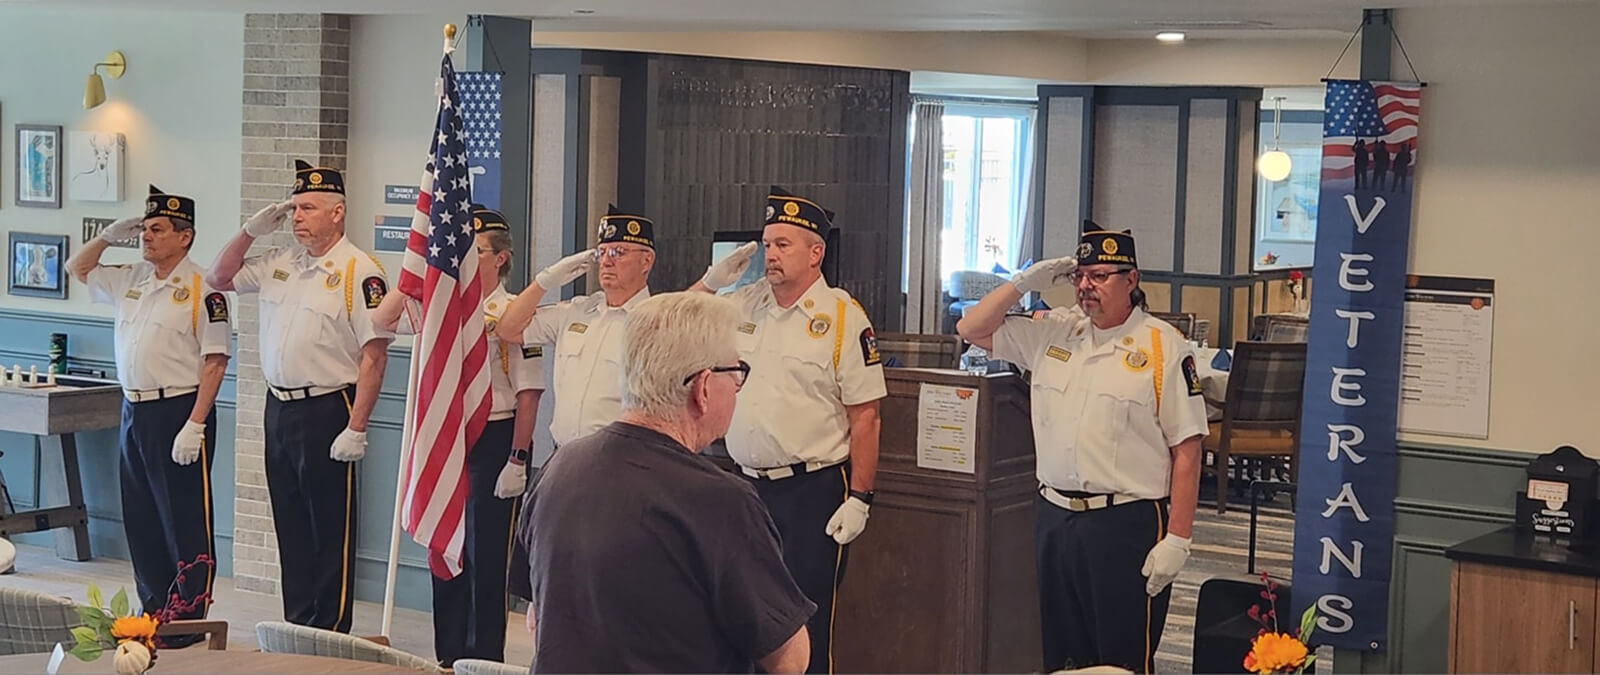 A solemn salute to the flag by veterans at The Waters of Pewaukee, representing the community's respect and honor for military service.